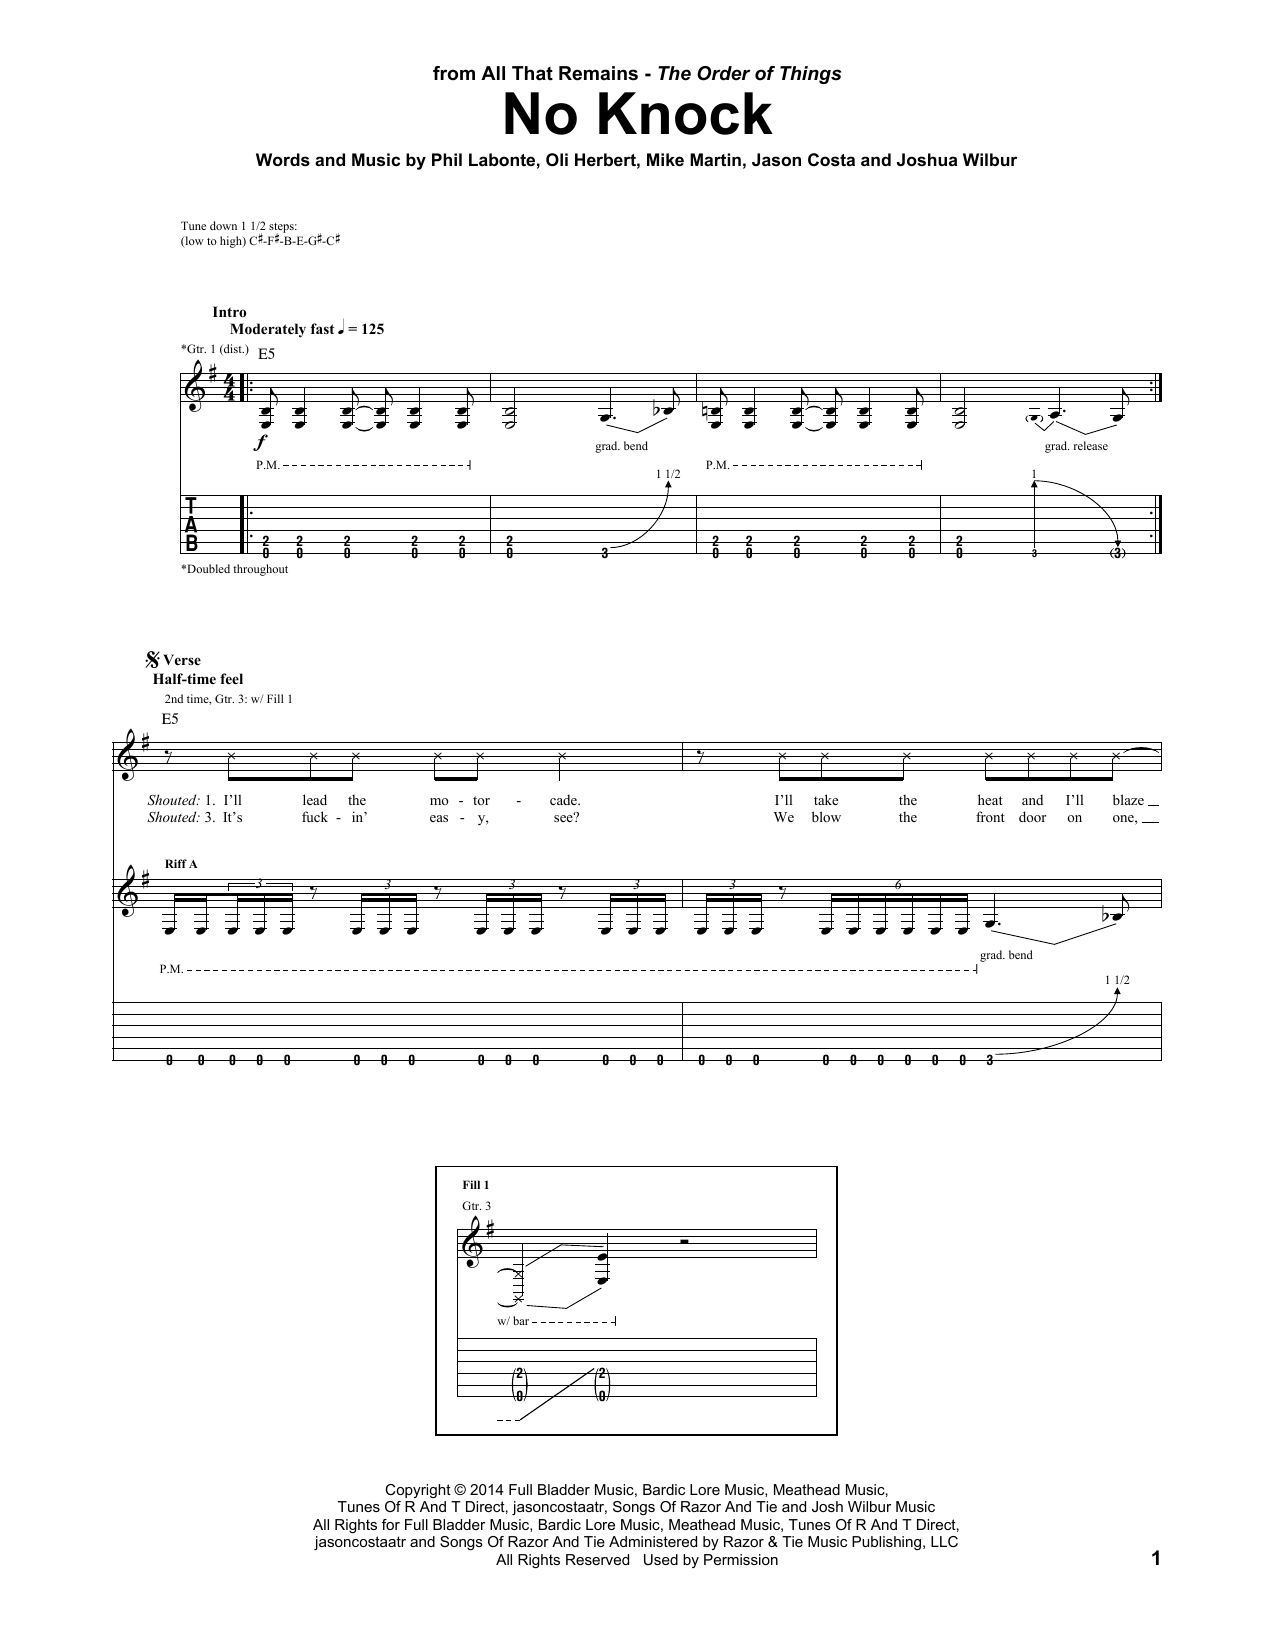 Download All That Remains No Knock Sheet Music